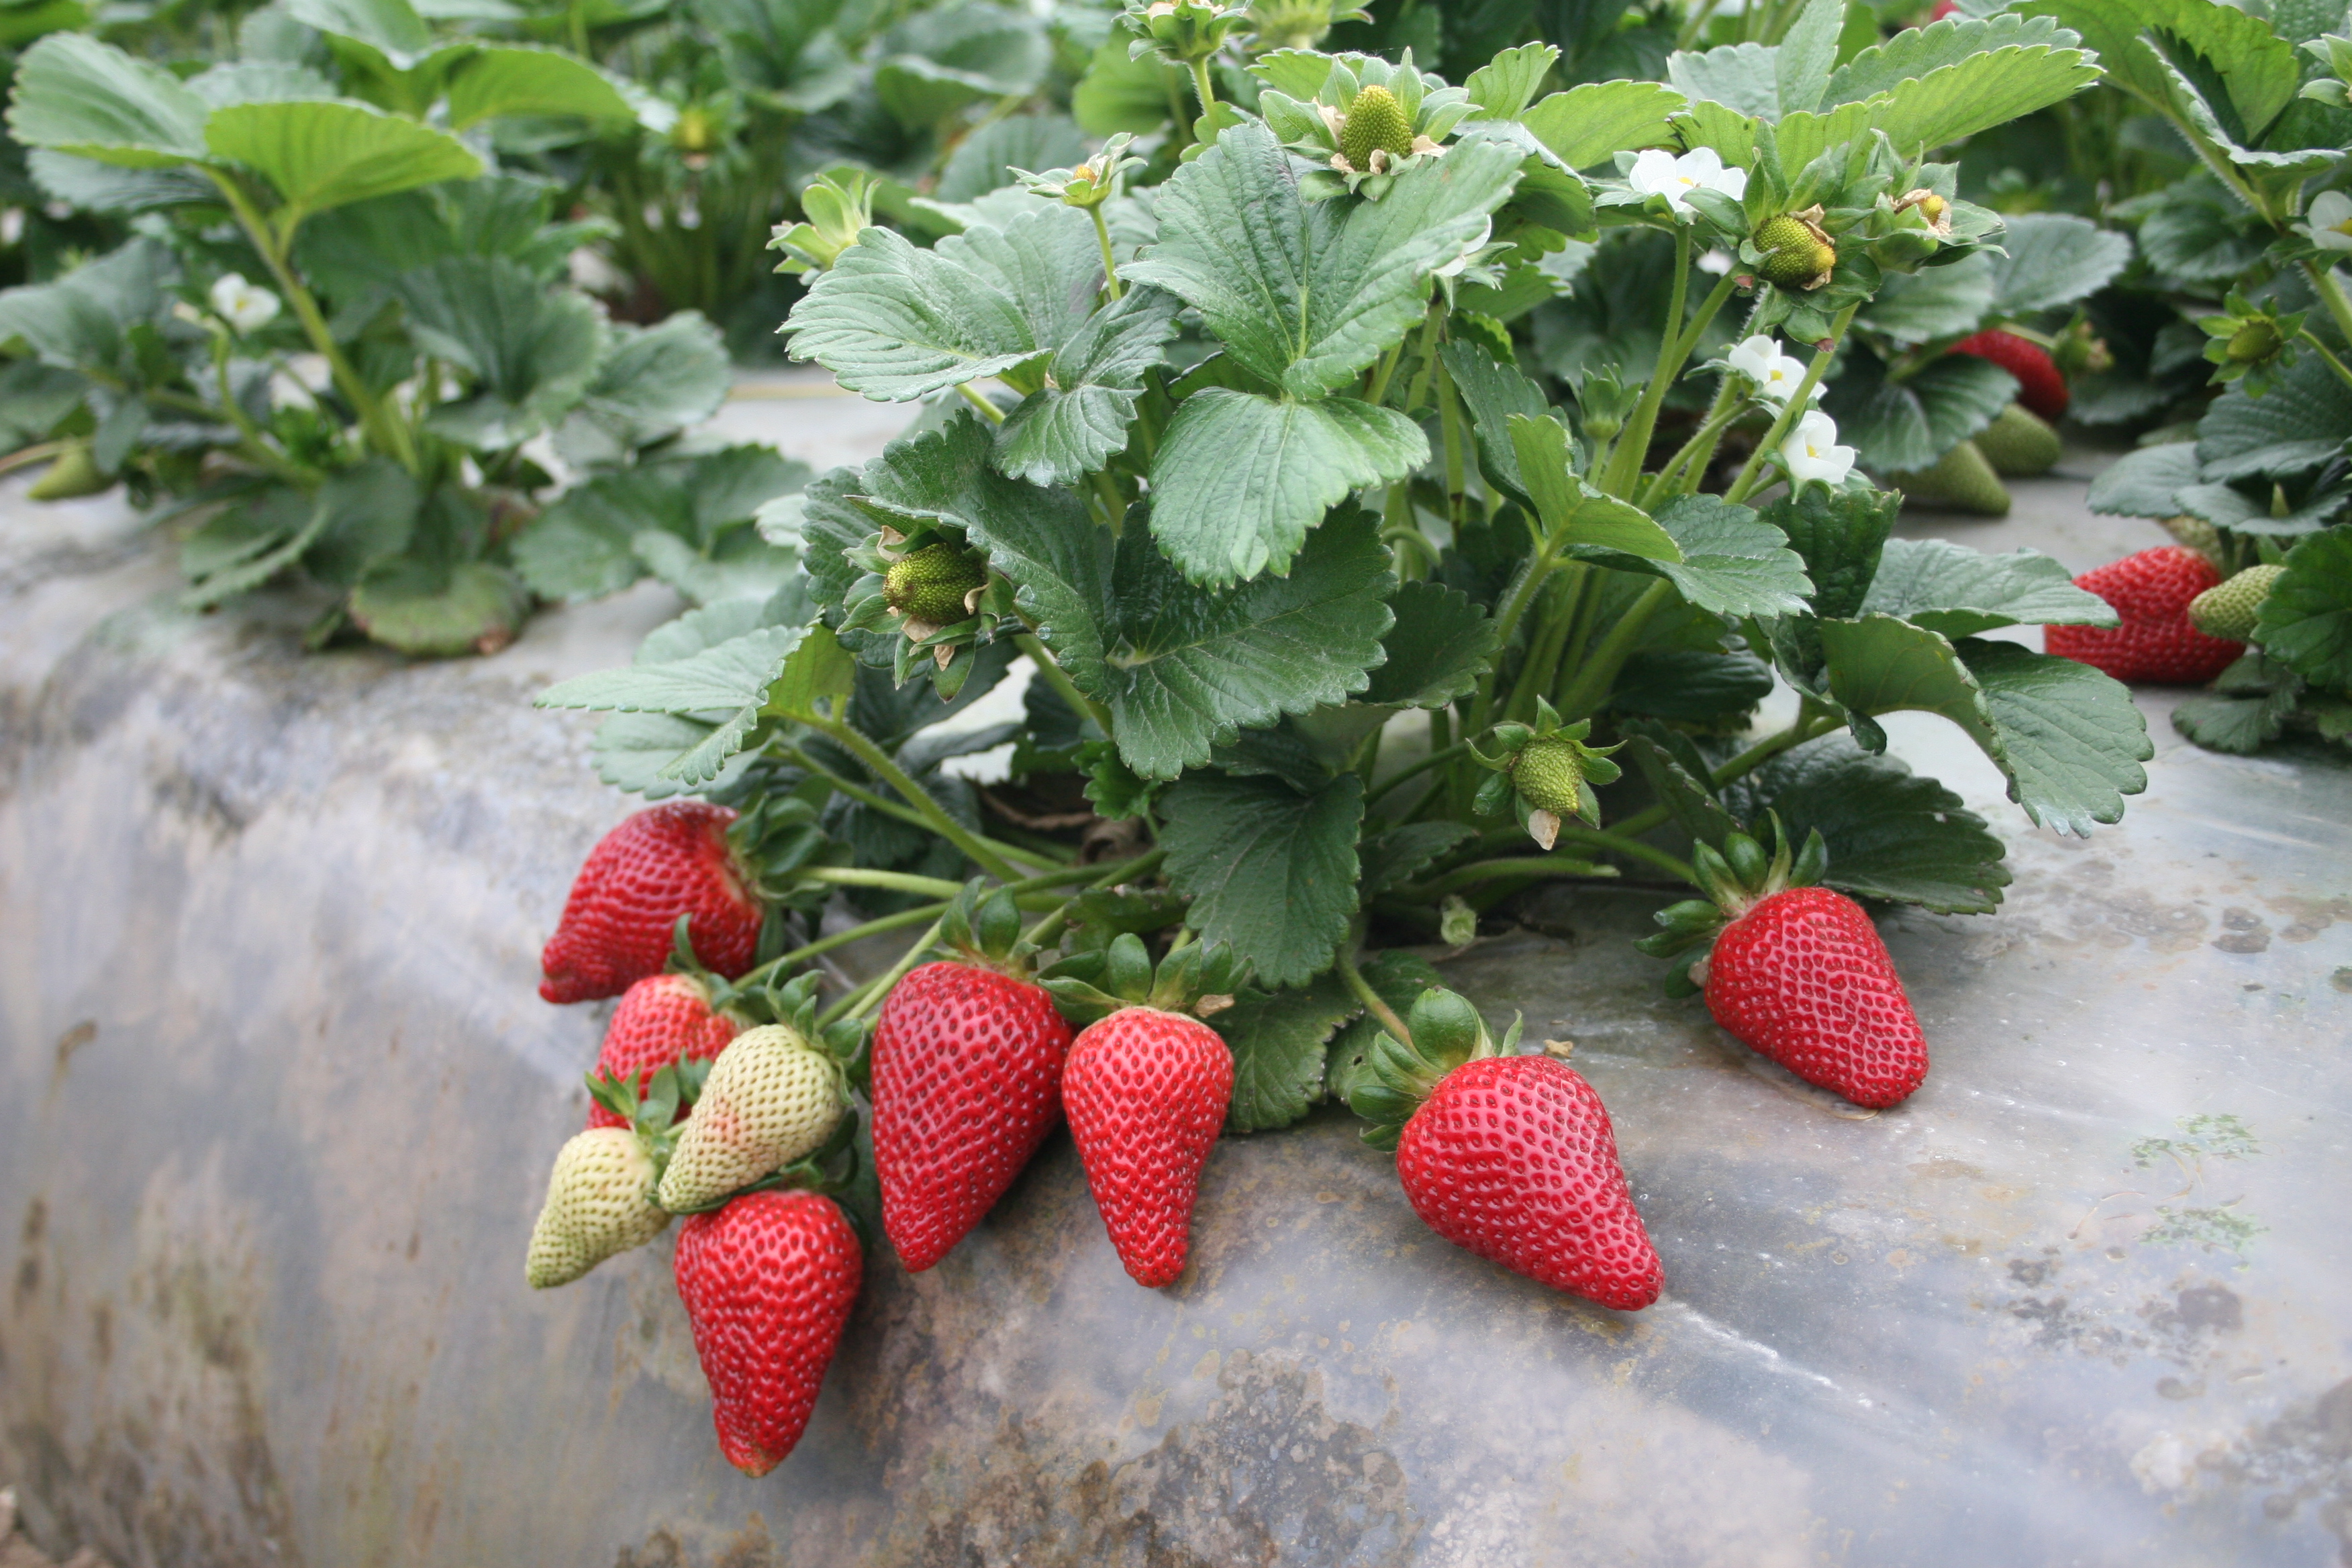 Strawberry acres rise to a new high as demand grows